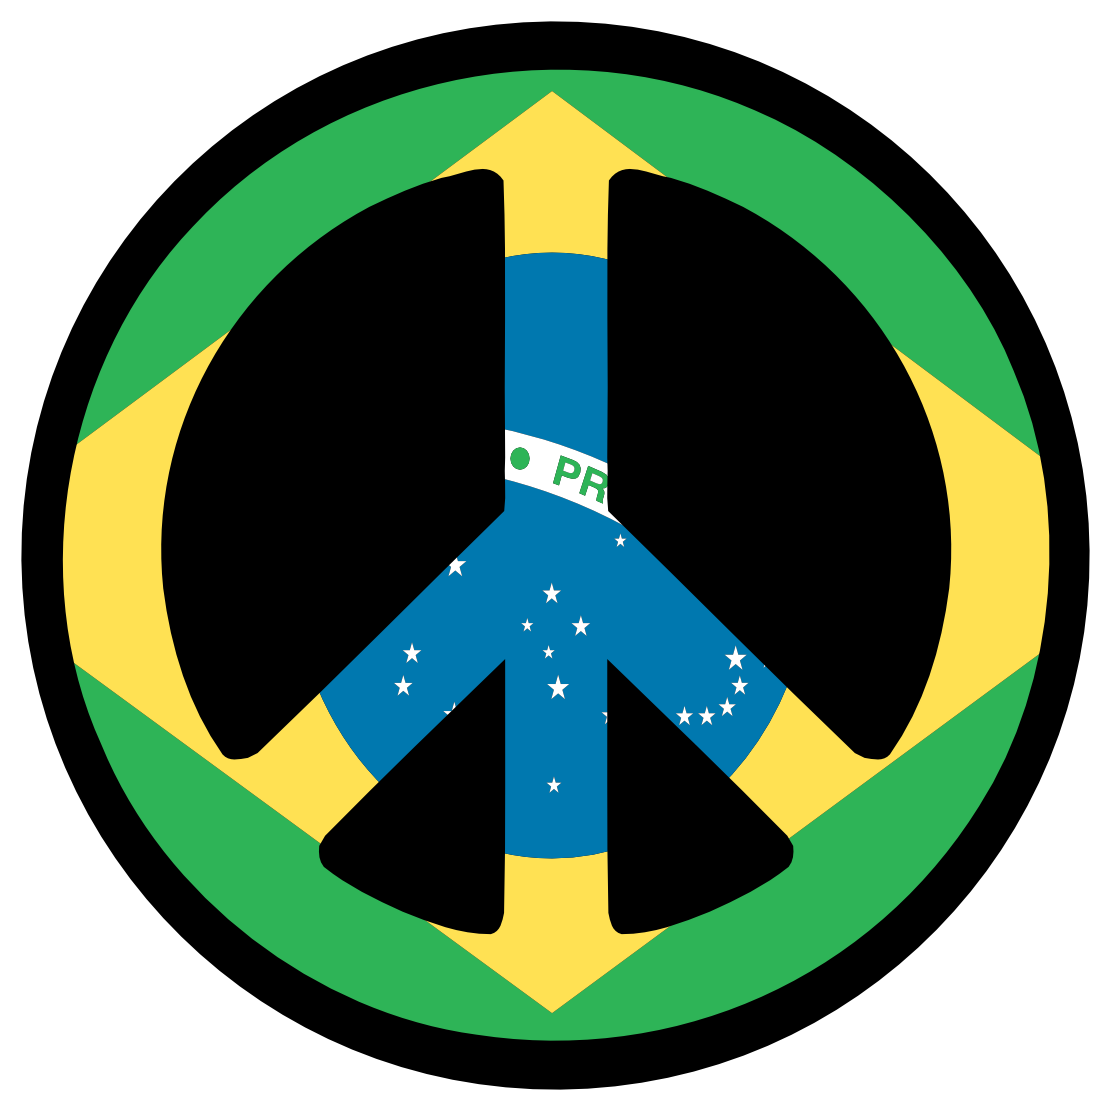 Brazil Flag Peace Symbol peacesymbol.org openclipart.org commons ...